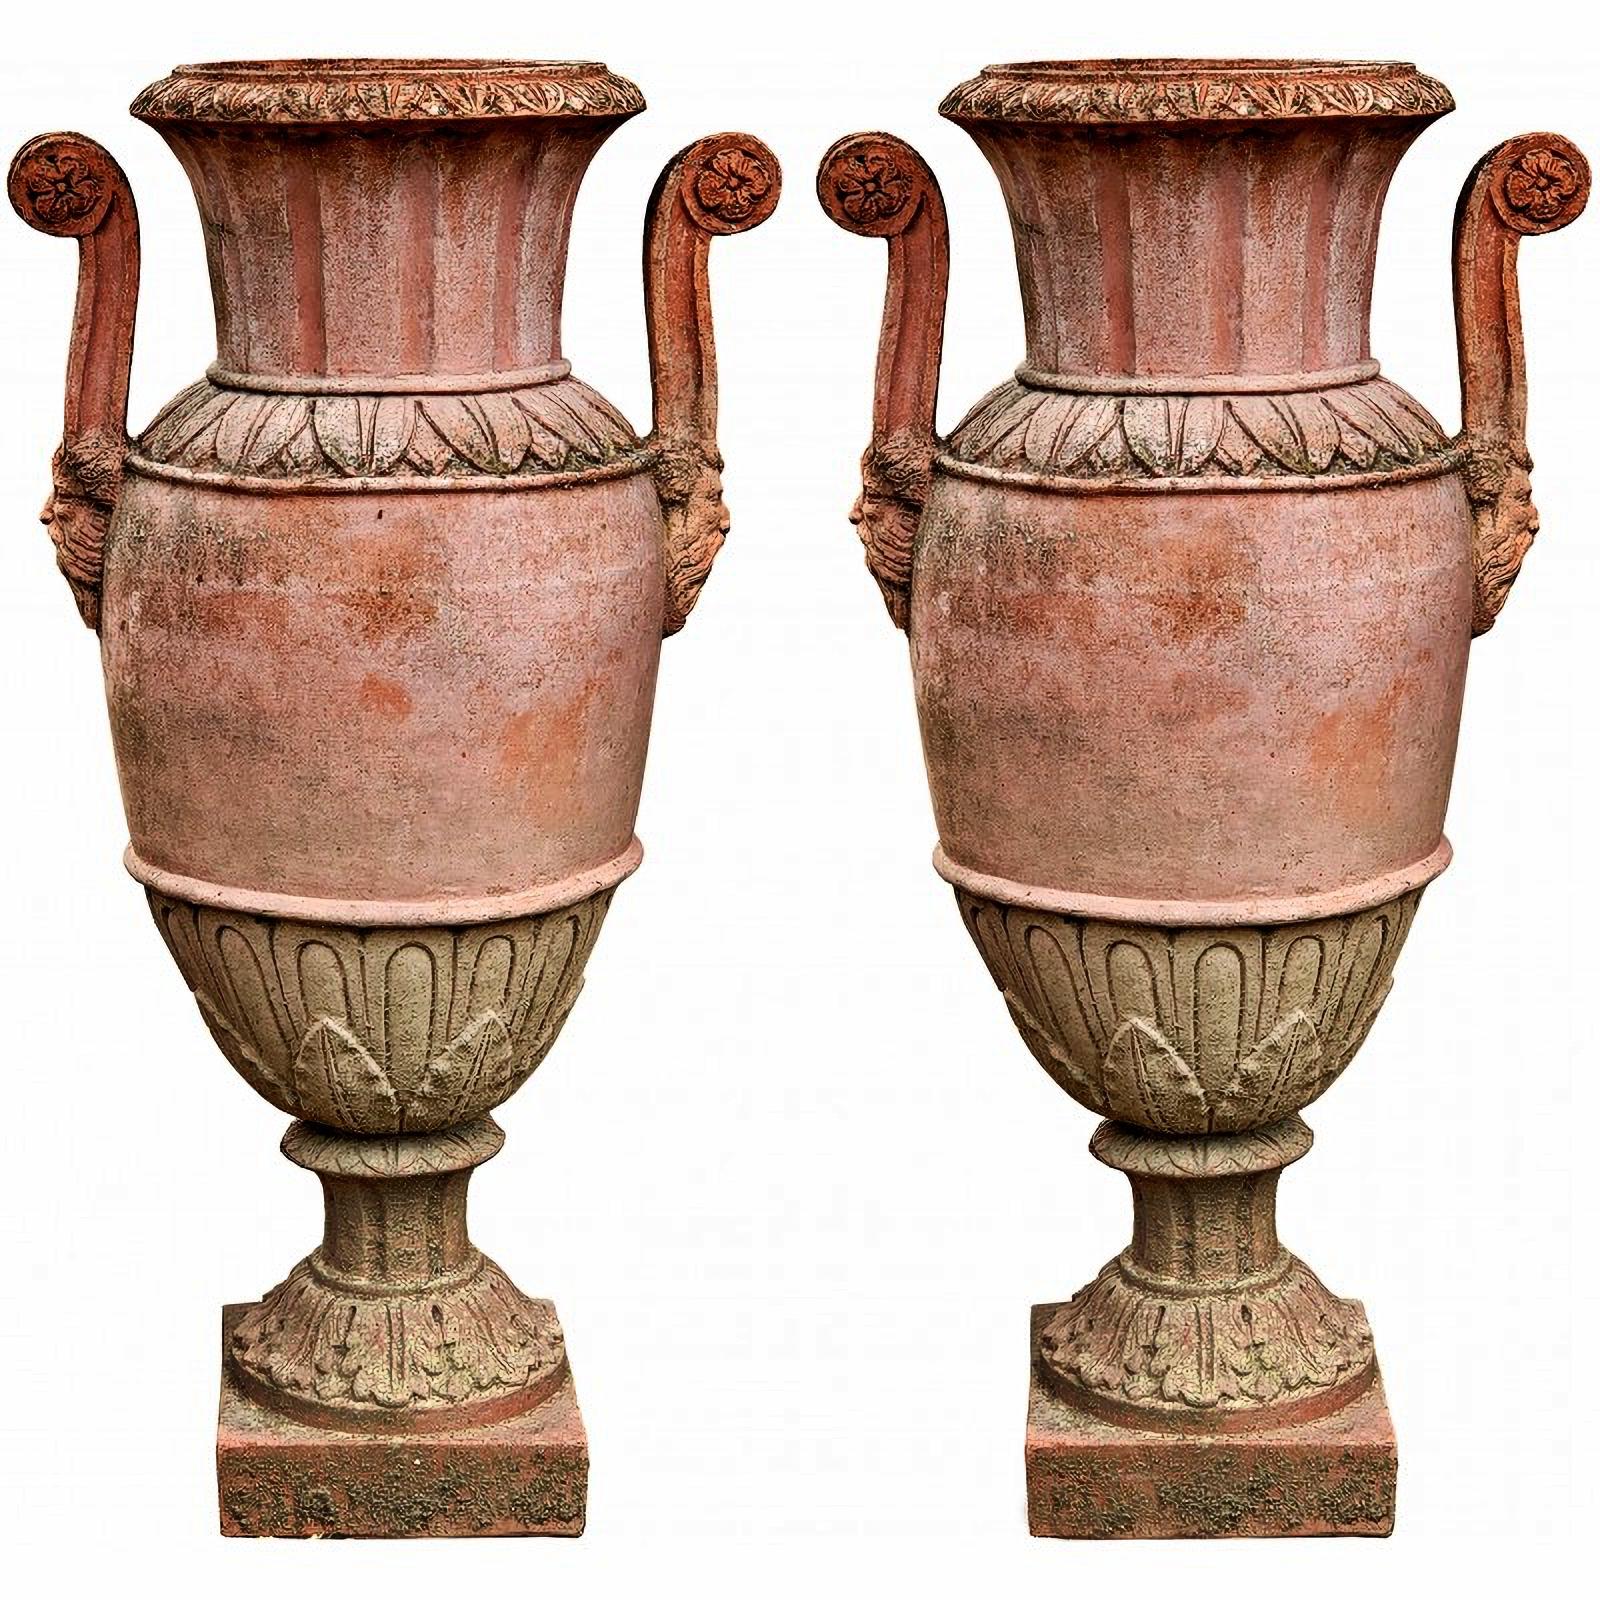 Italian PAIR OF TUSCAN EMPIRE VASES WITH HANDLES TERRACOTTA IMPRUNETA FLORENCE 20th Cent